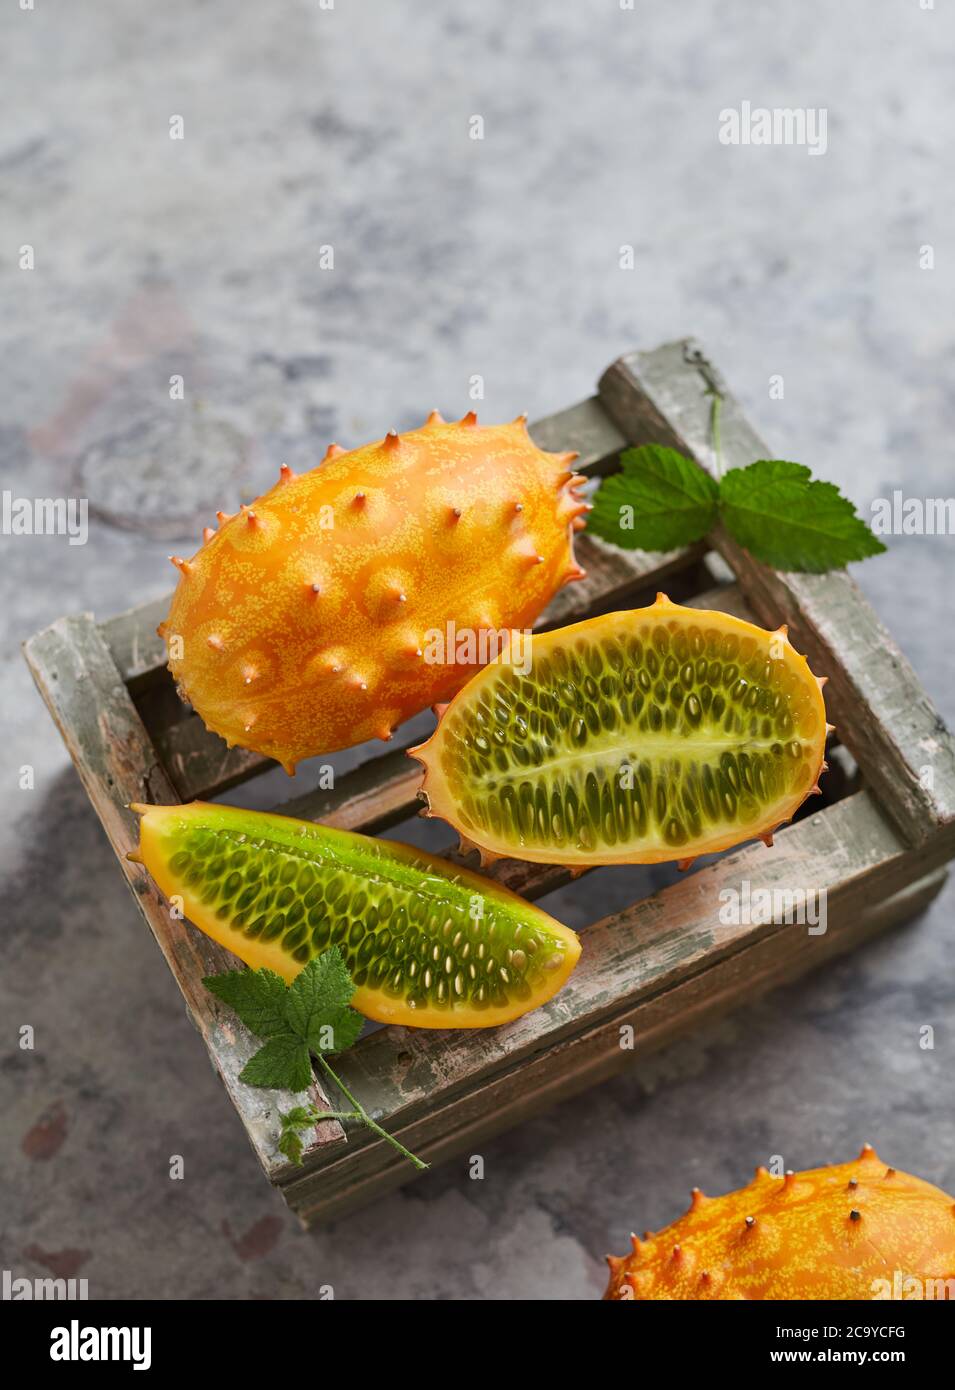 Kiwano fruit on a crate Stock Photo